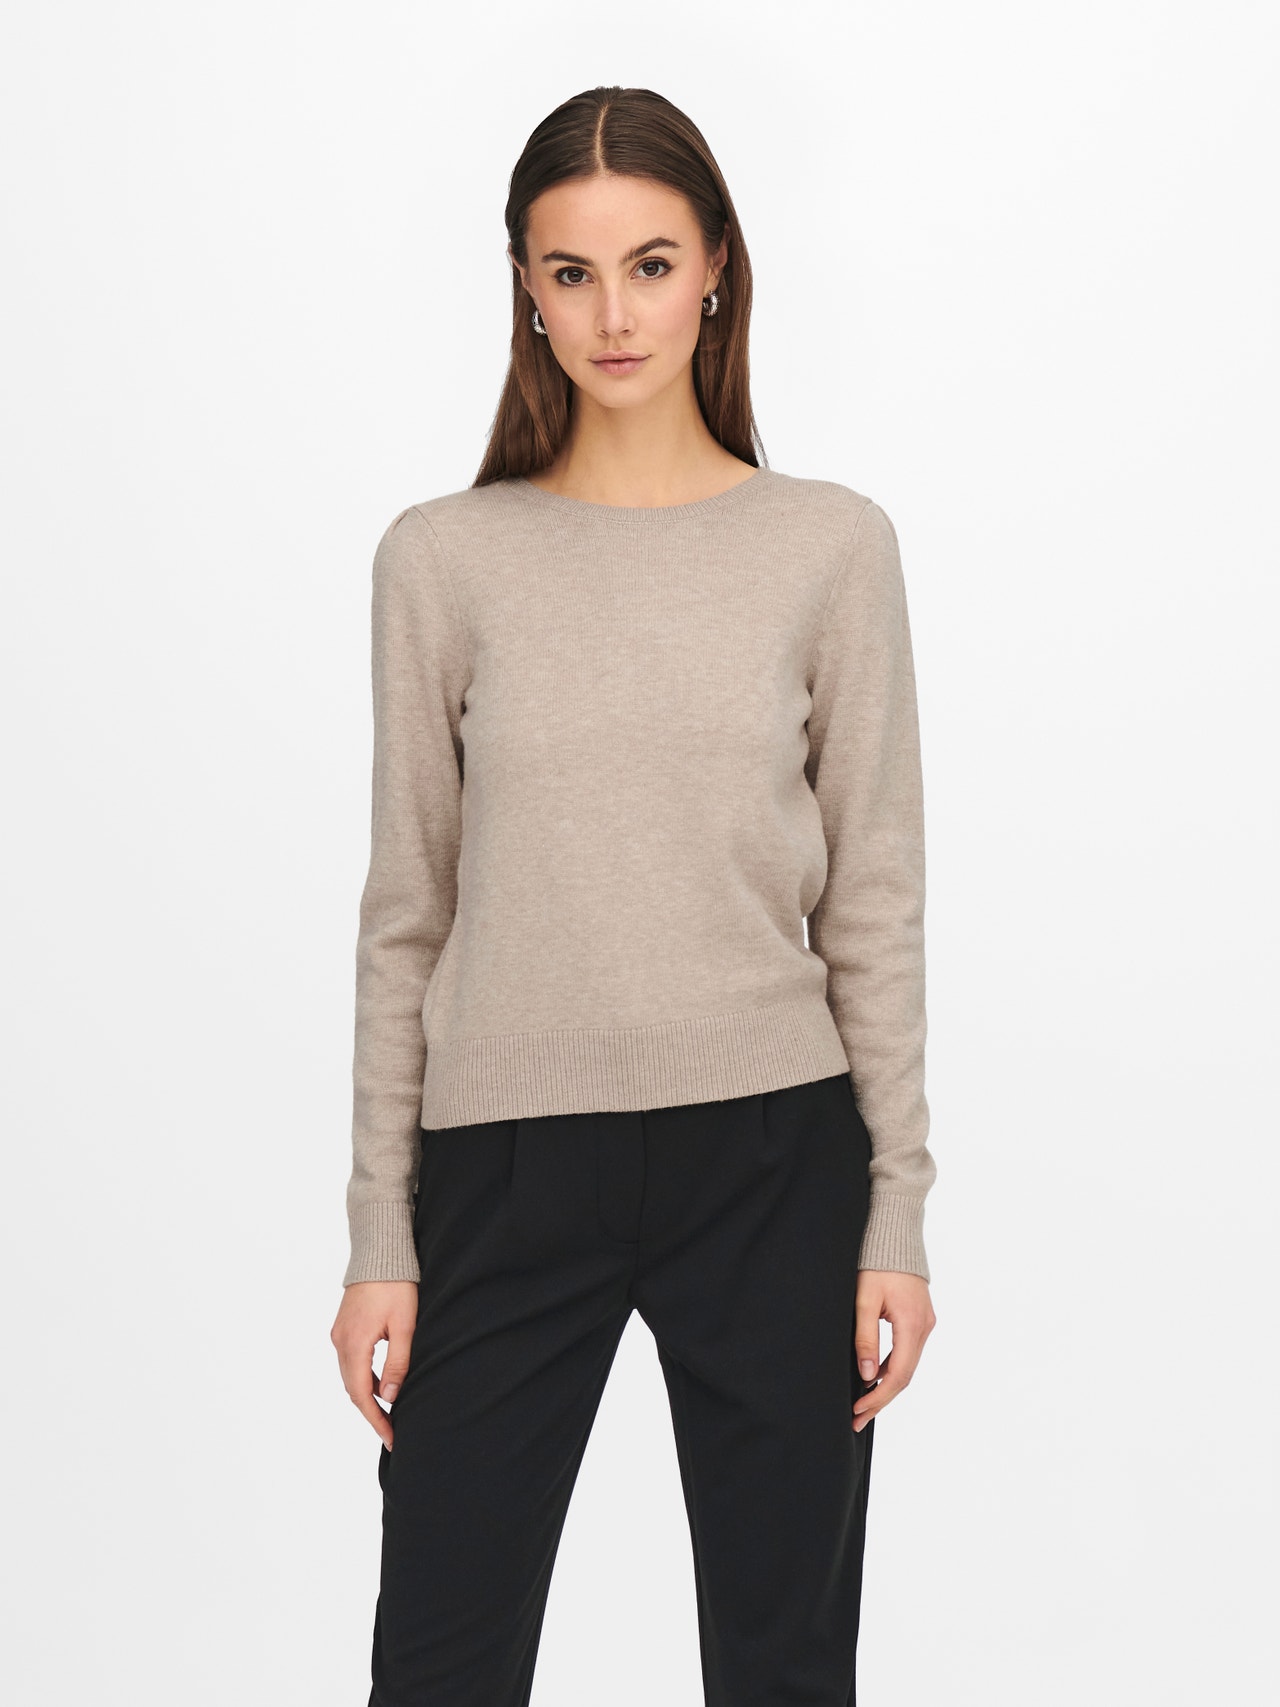 ONLY O-hals Pullover -Beige - 15237060